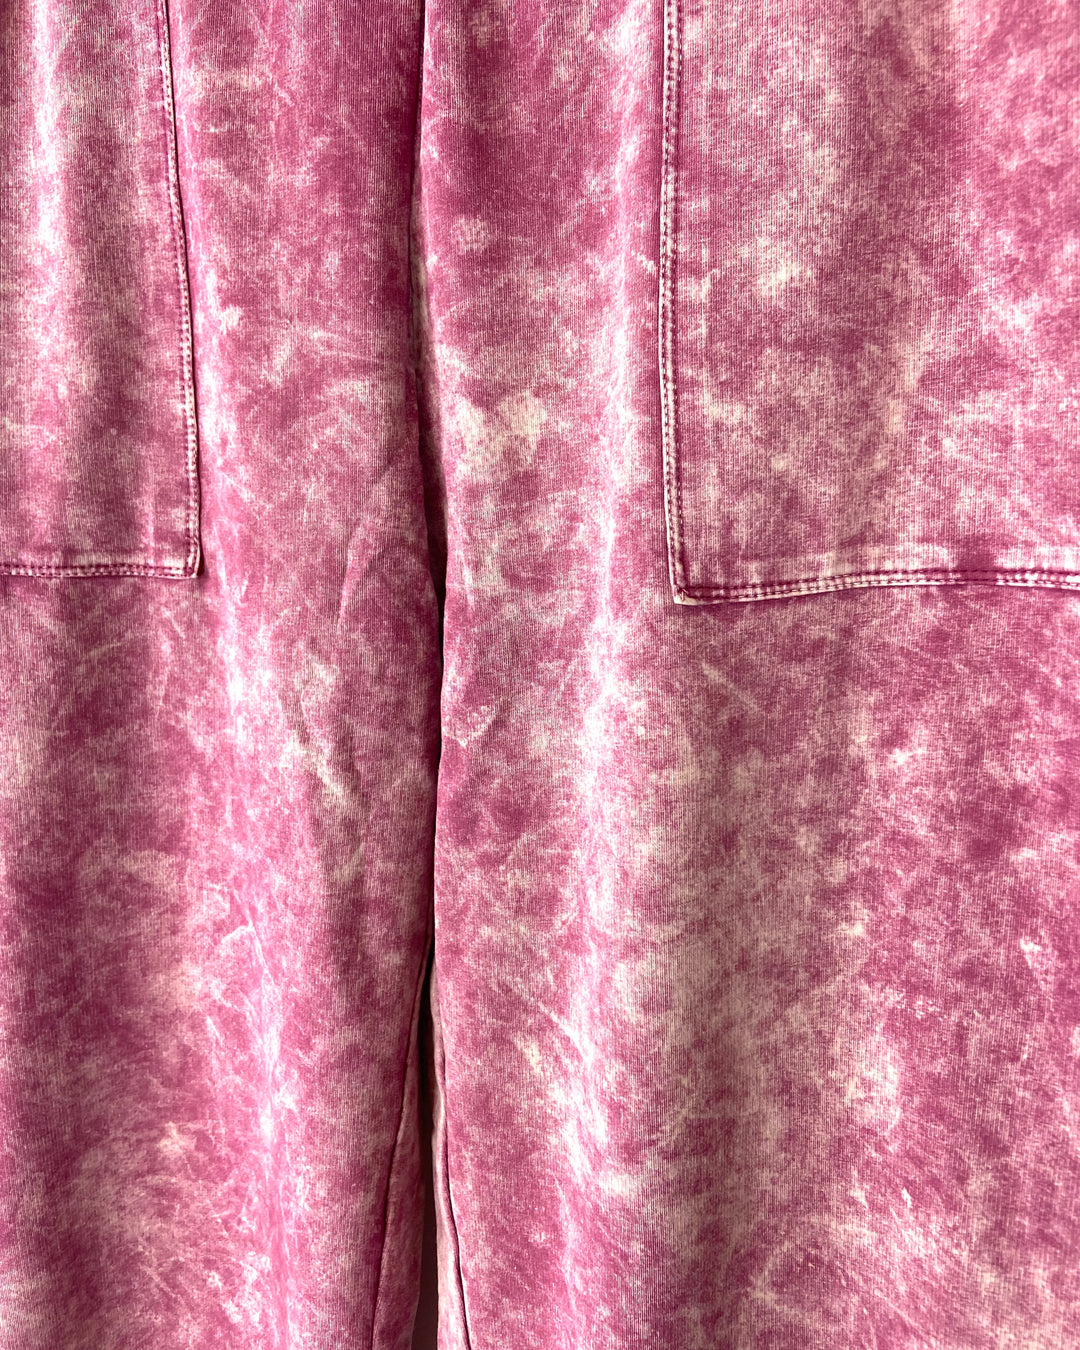 Purple Acid Wash Cropped Stretch Pants - Size 6-8, and Size 1X